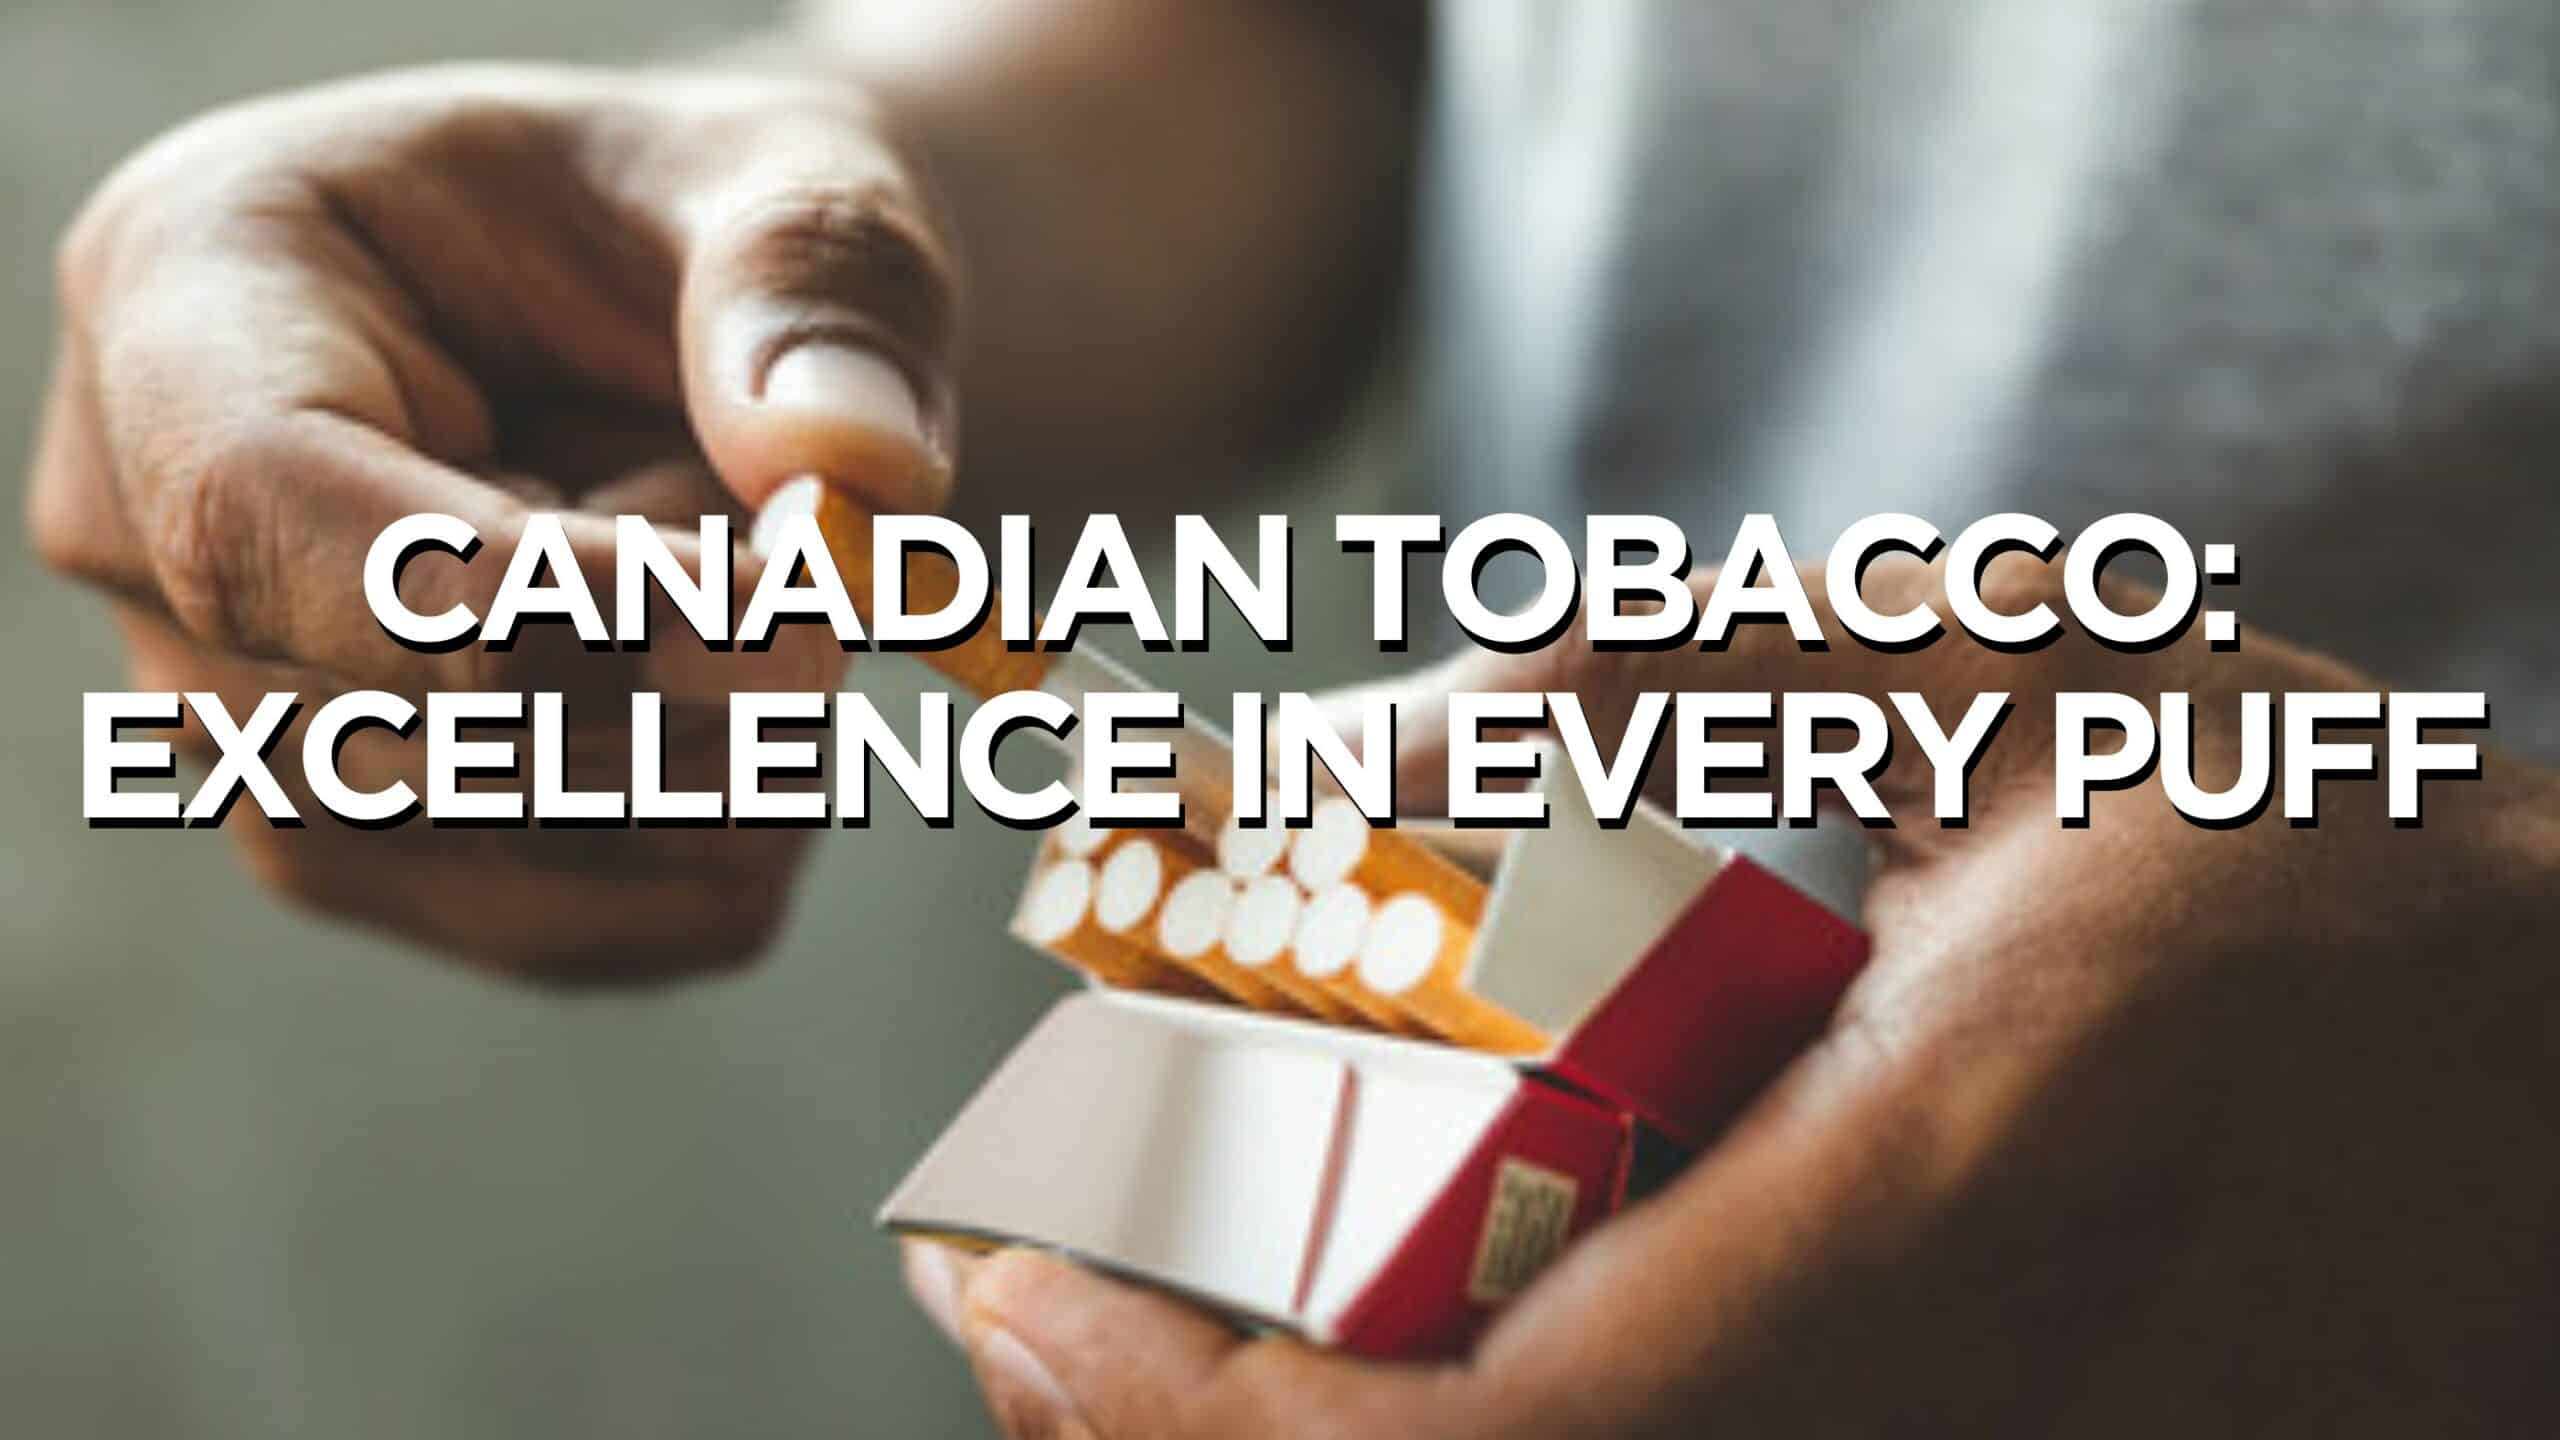 Canadian Tobacco: Excellence in Every Puff